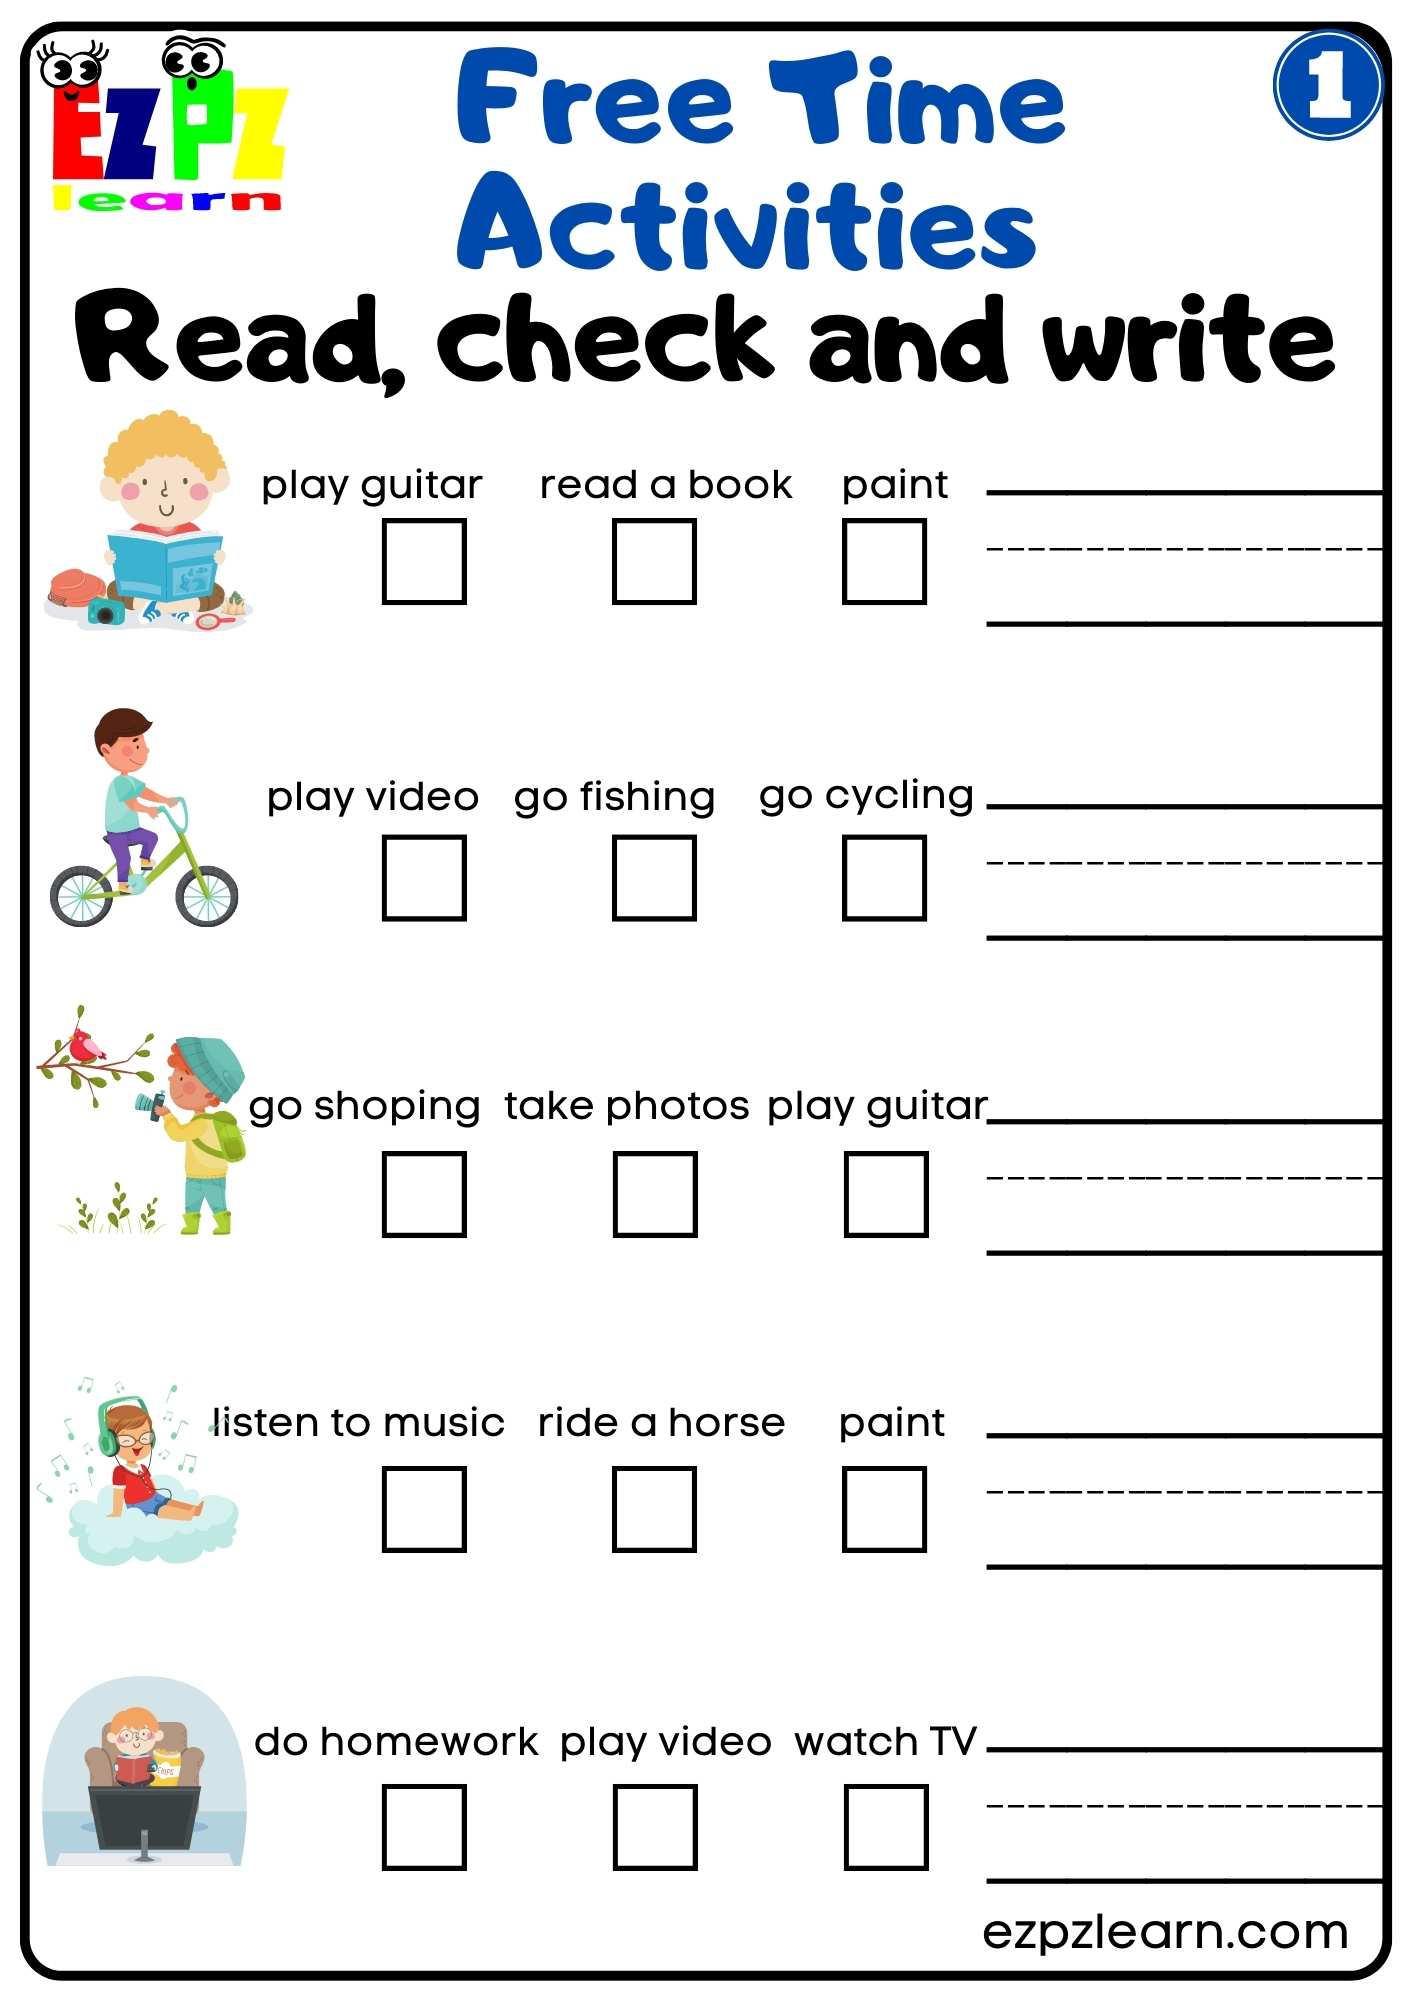 Free time activities - multiple choice worksheet